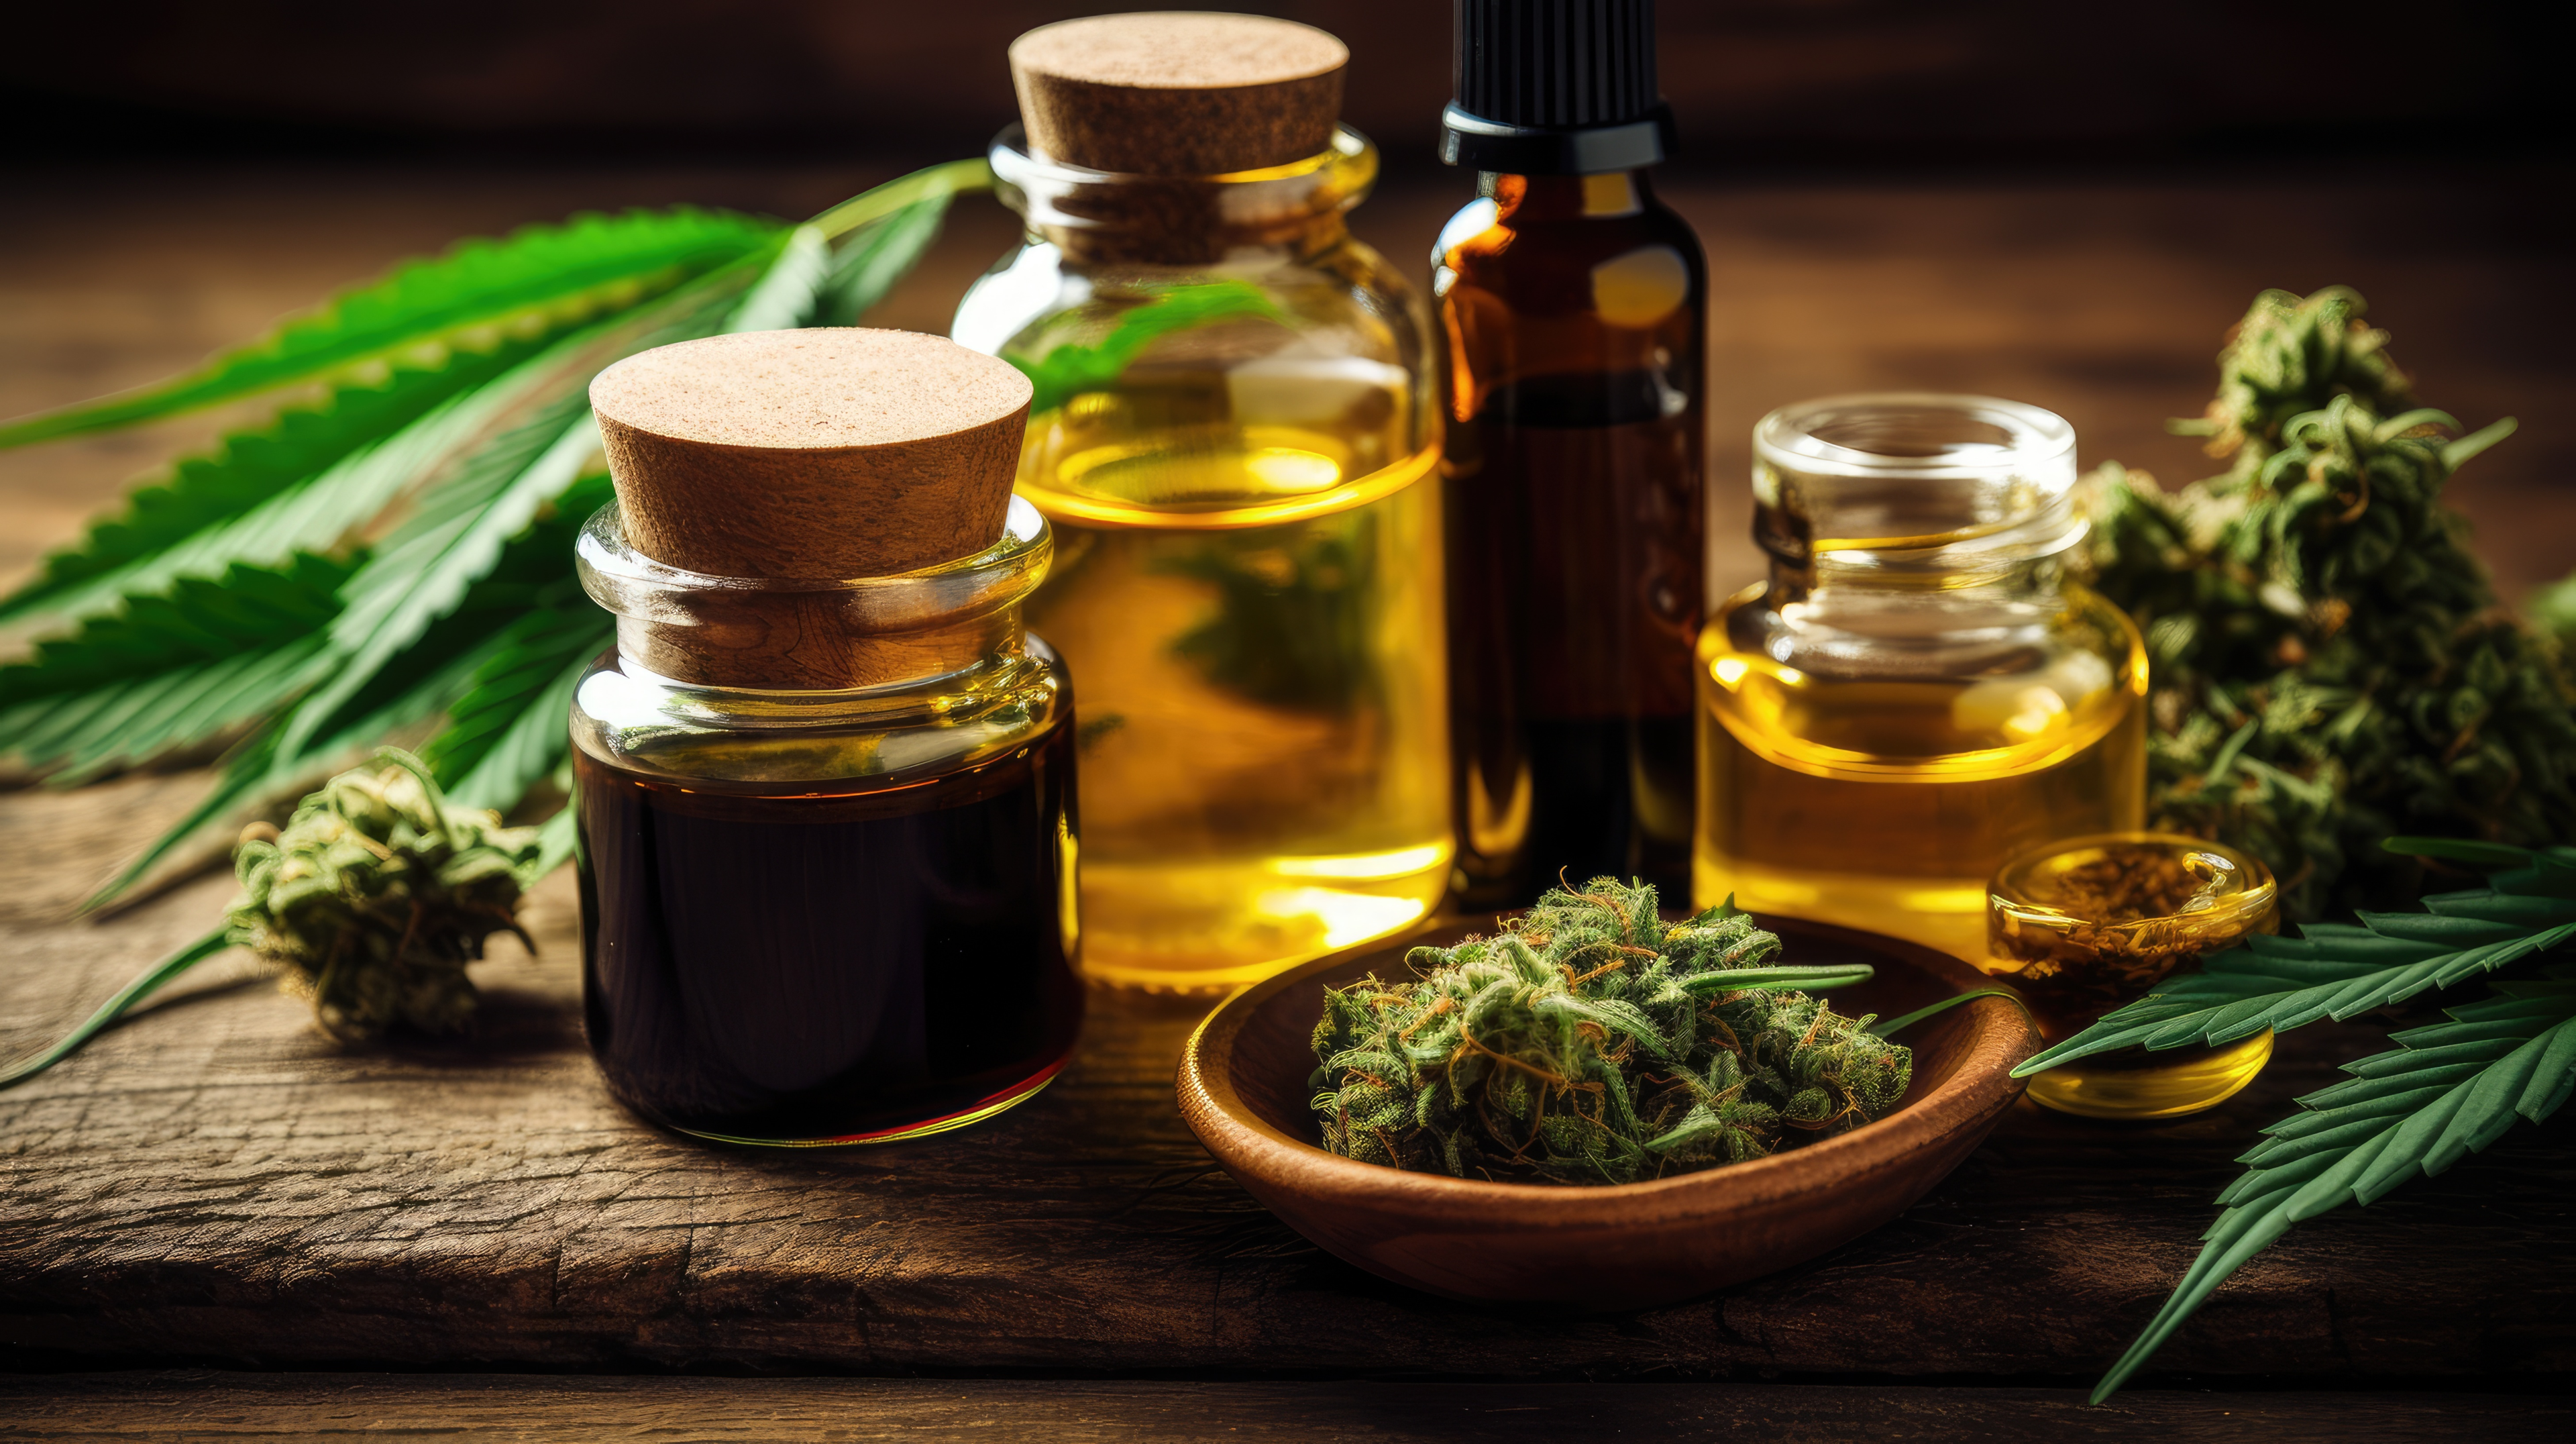 Cannabis products have a wide range. People report and may use an oil or butter for various cooking methods. Others might use an oil or marijuana for medical purposes, as recent reports could suggest.